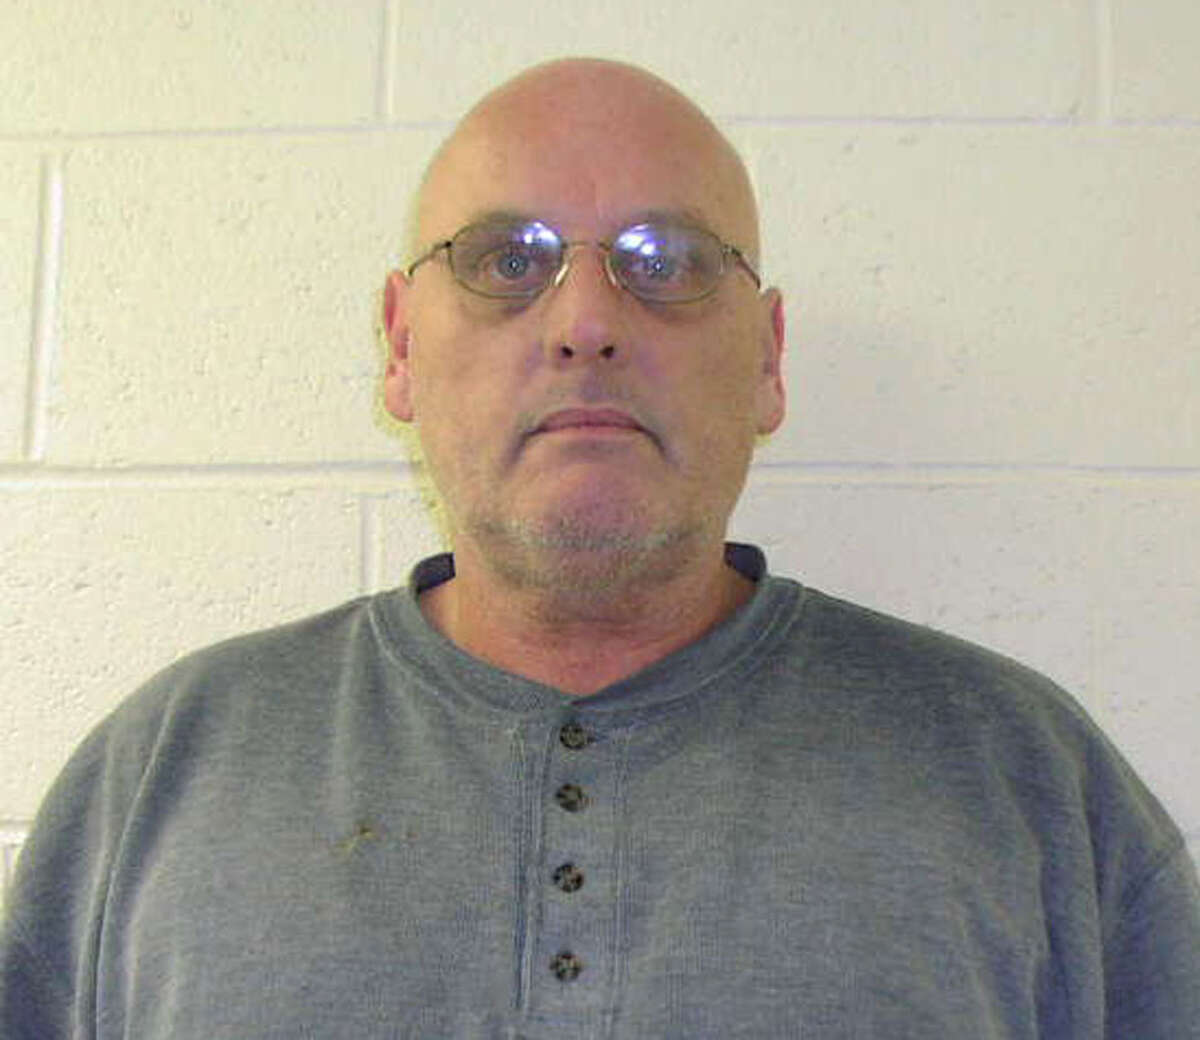 Russell Mace, of New Milford, is charged with the Dec. 17th robbery of a New Milford bank.